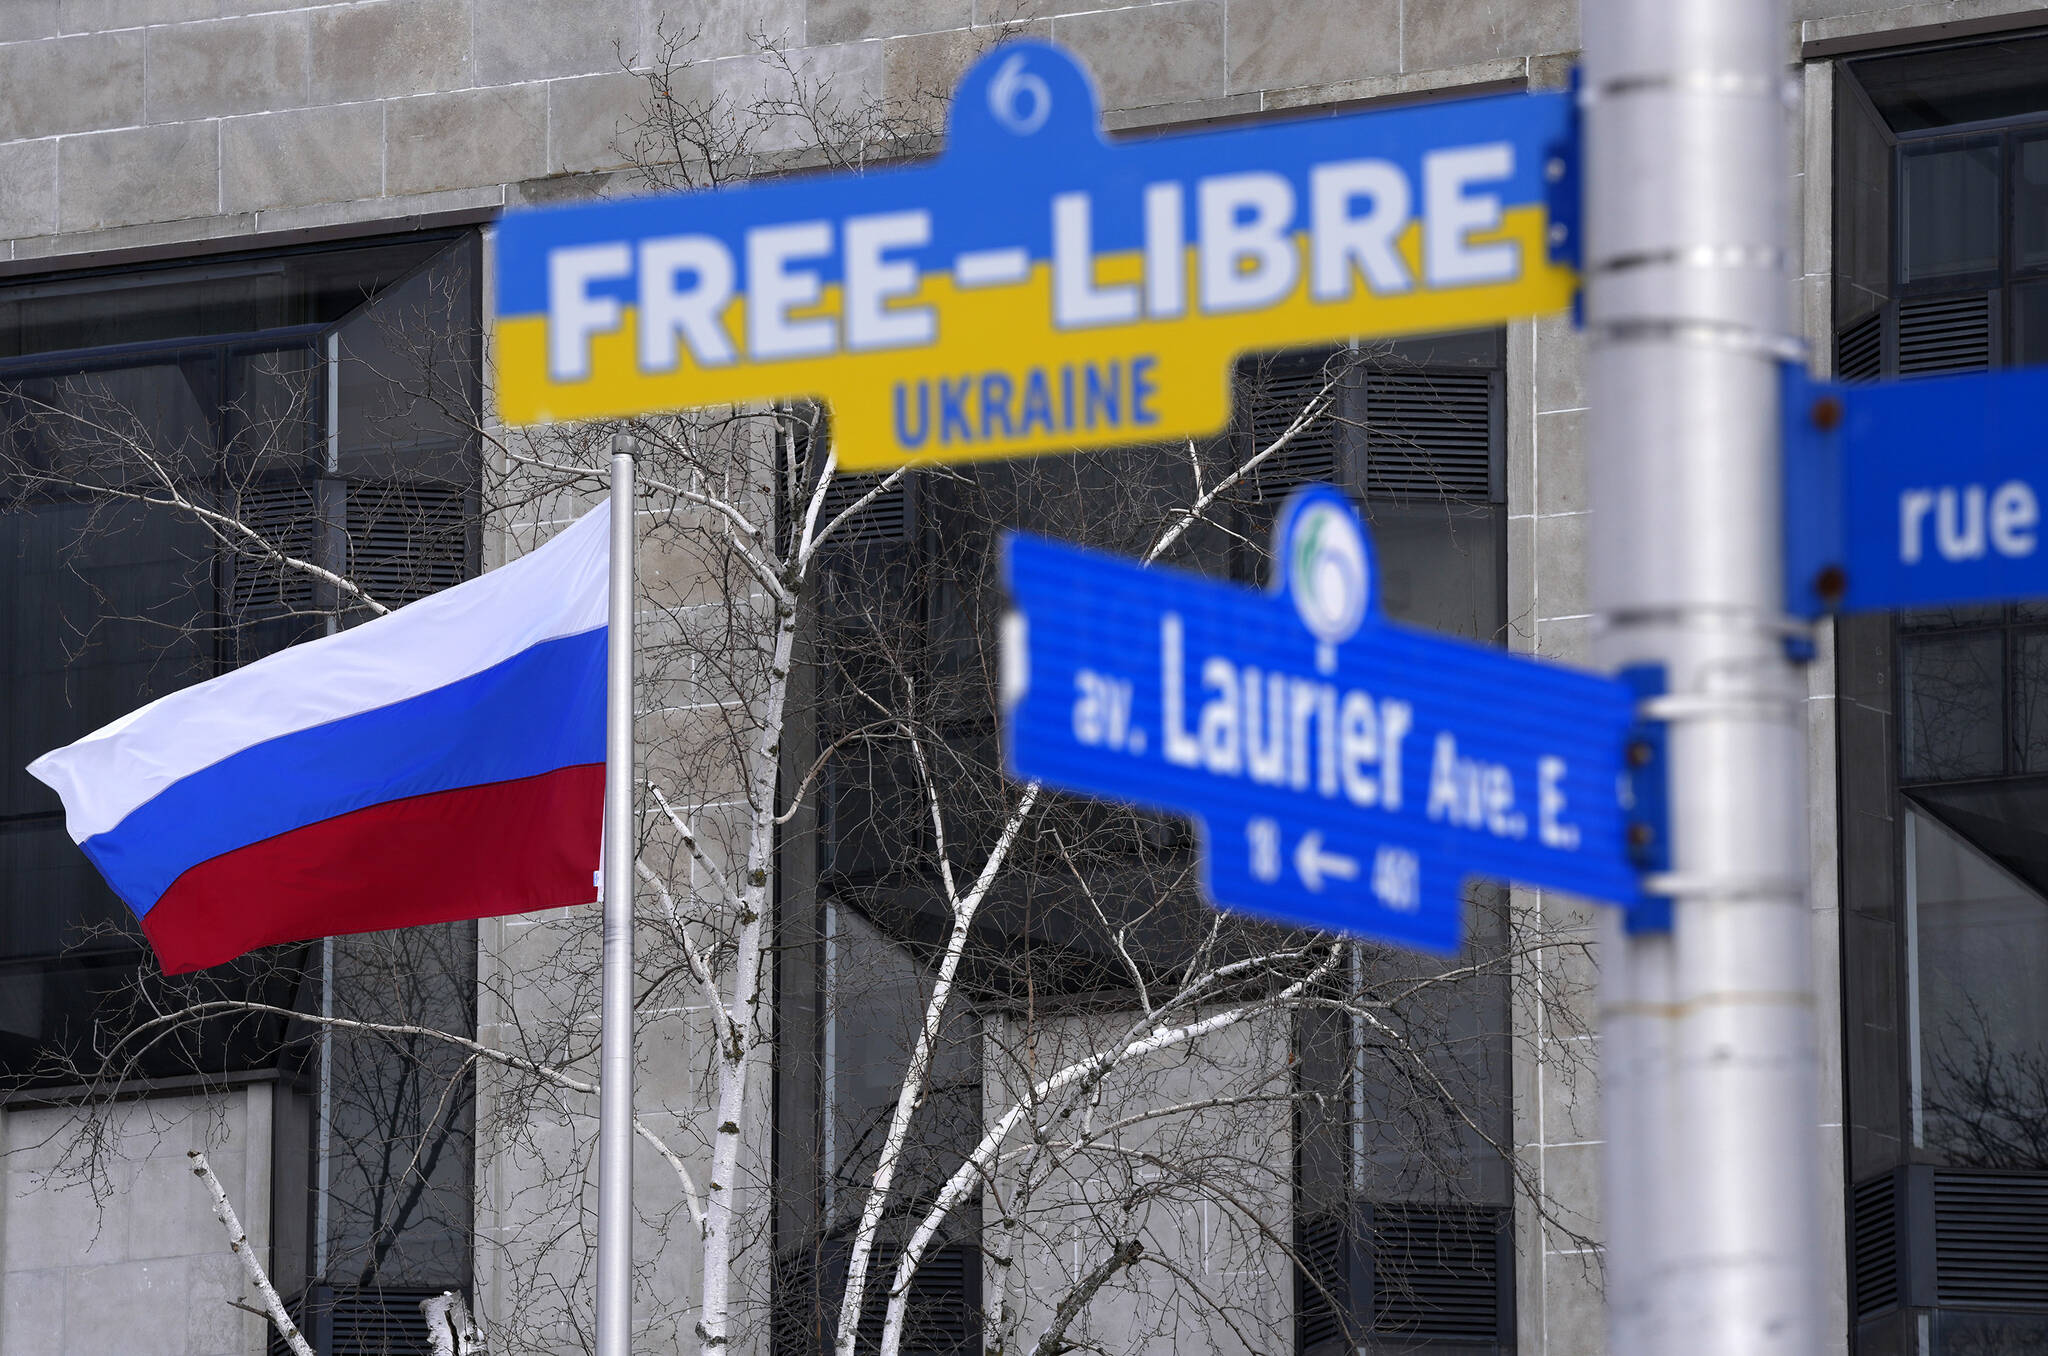 The flag of Russia flies at the Embassy of Russia in Ottawa behind a street sign calling for a free Ukraine, installed on posts adjacent to the road as a gesture of solidarity by the City of Ottawa, as Russia continues its invasion of Ukraine, on Wednesday, March 2, 2022. THE CANADIAN PRESS/Justin Tang